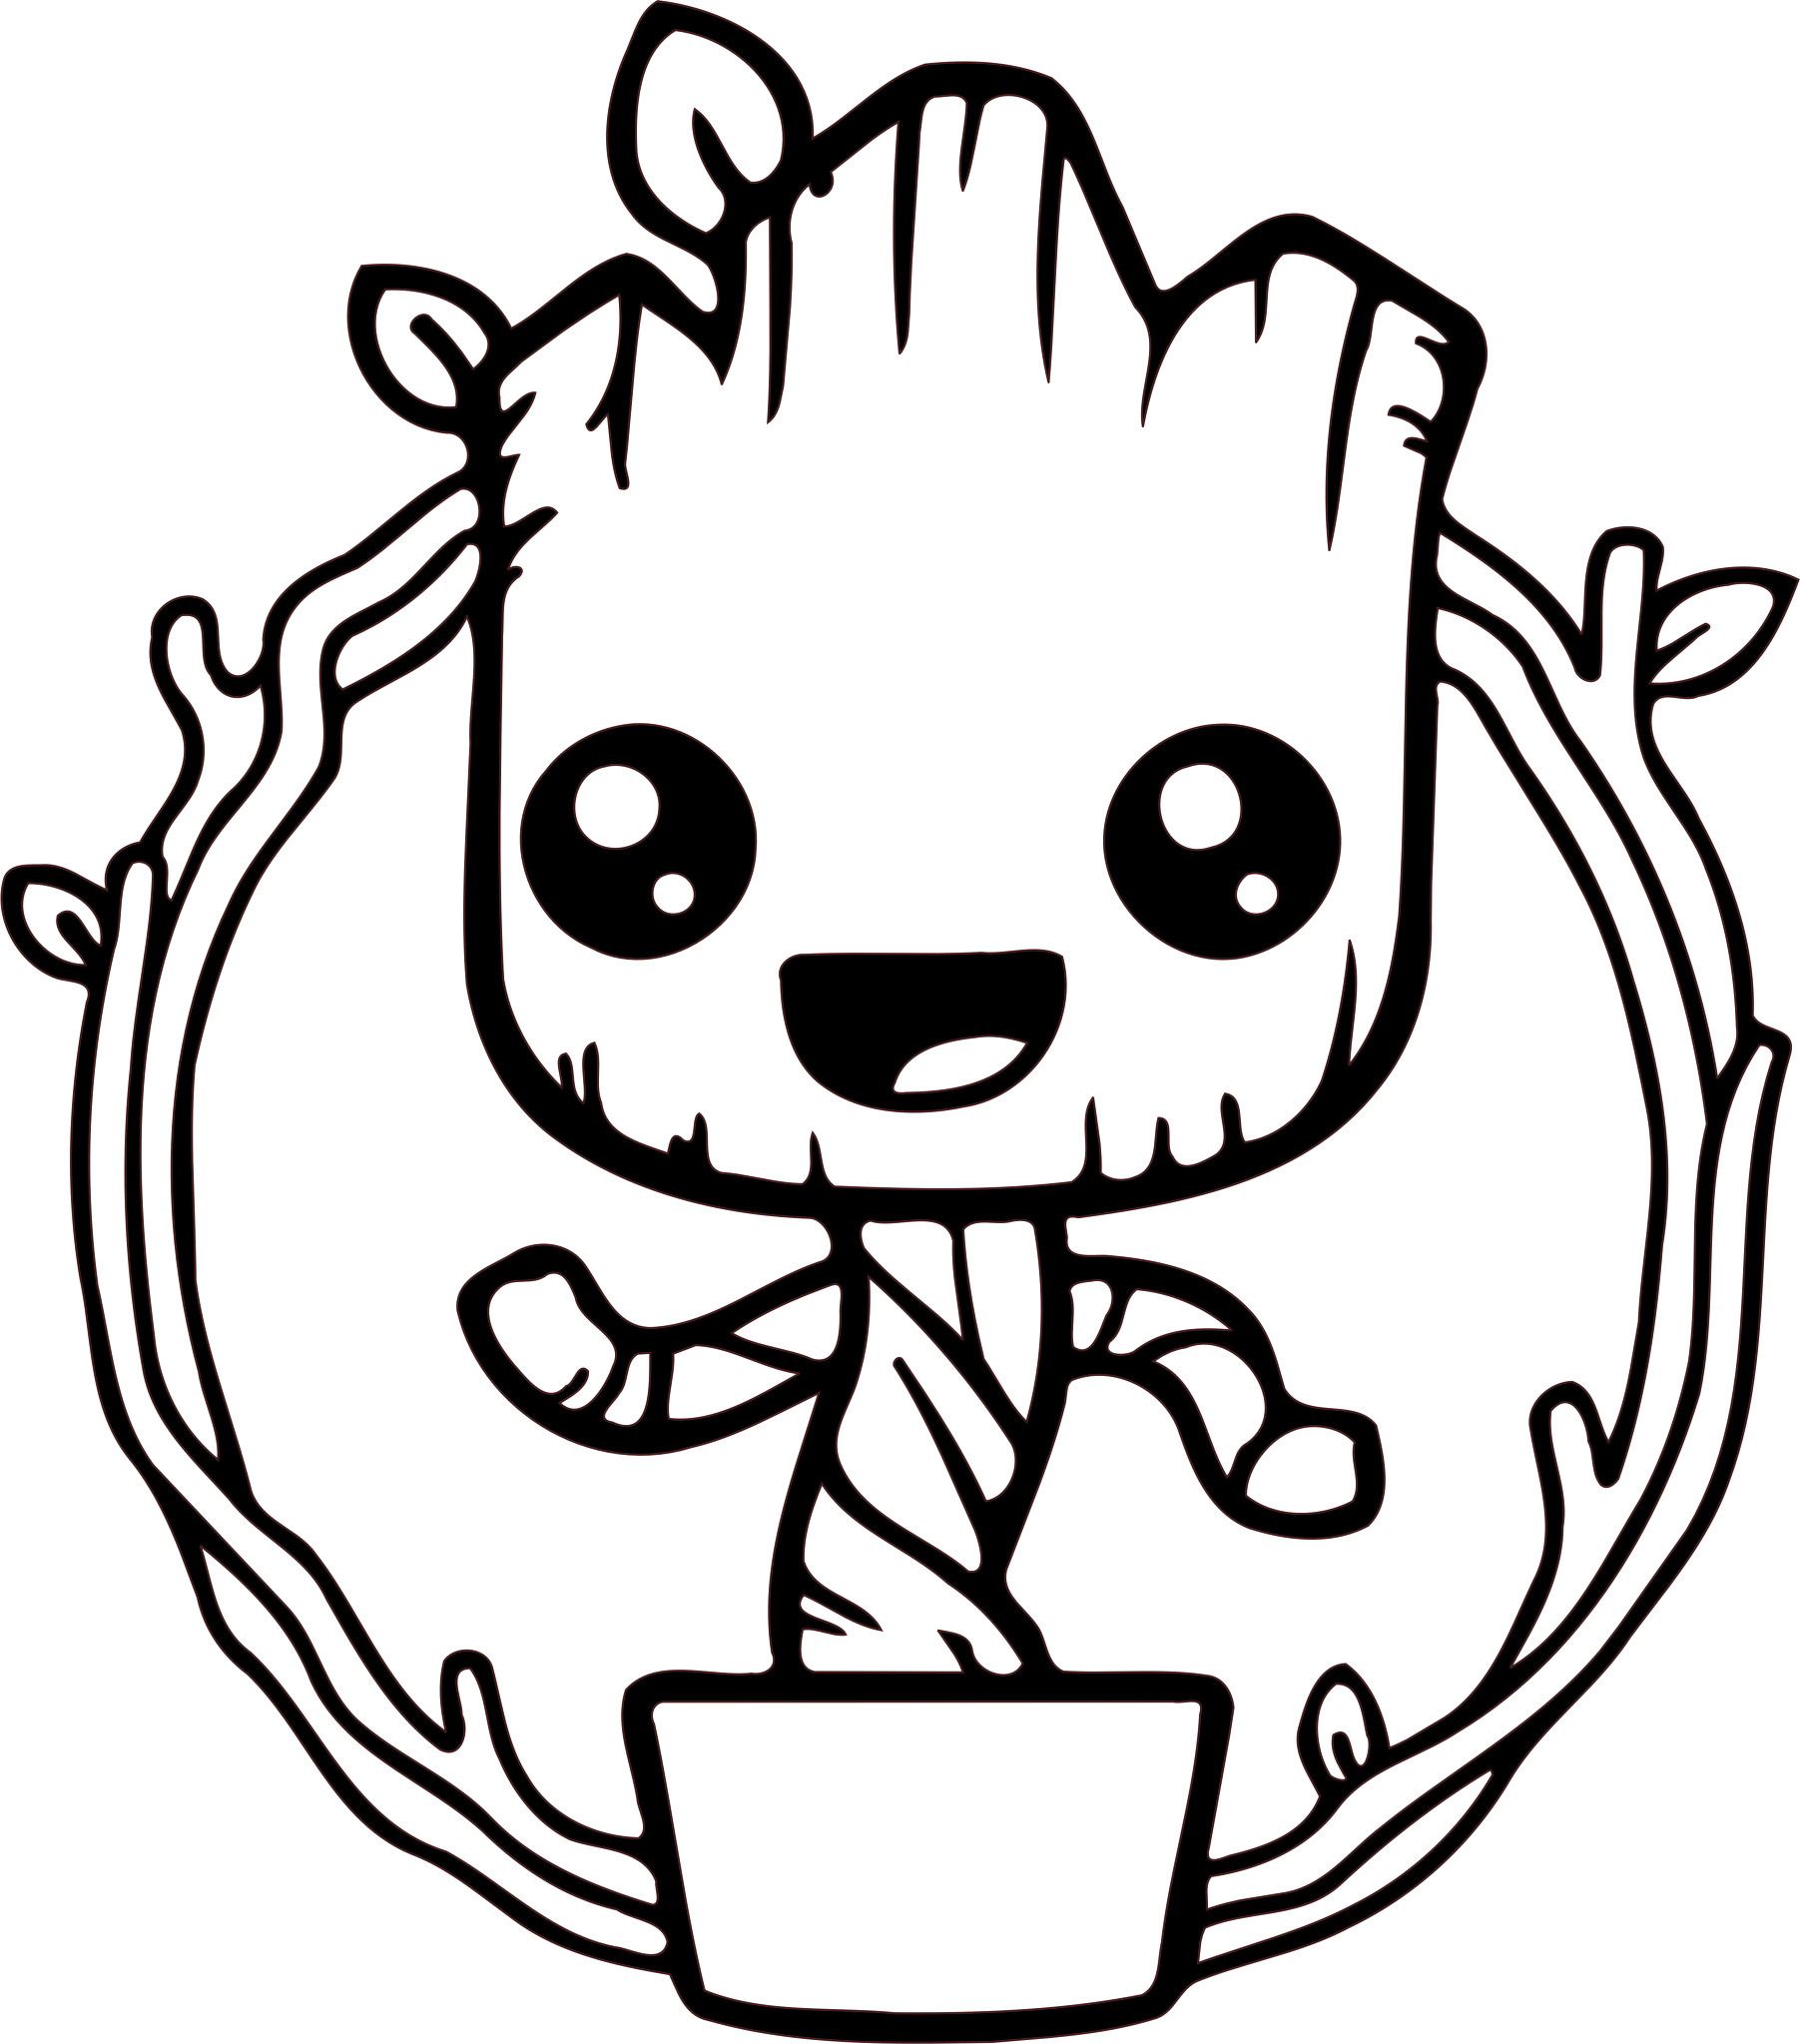 The Best Baby Groot Coloring Page – Home, Family, Style and Art Ideas